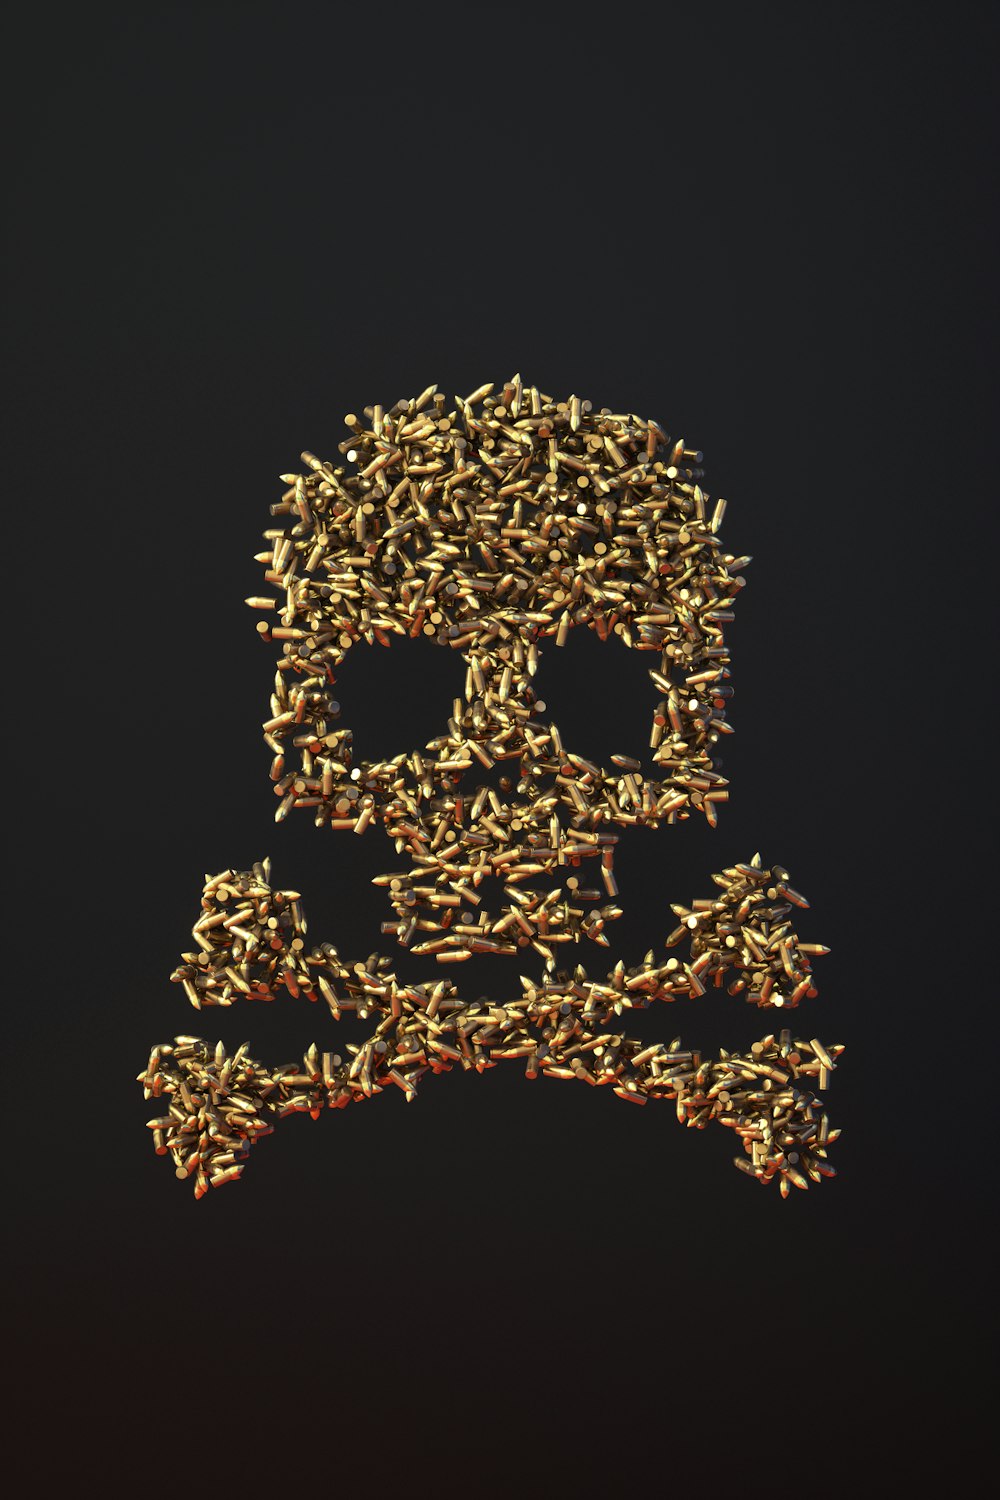 a picture of a skull made out of tiny objects